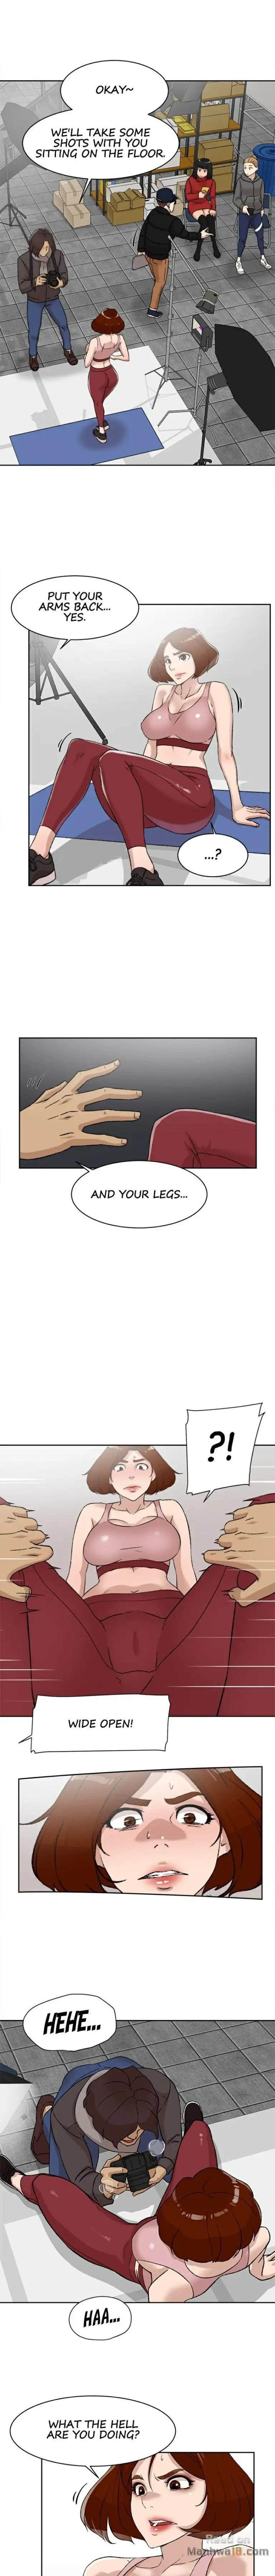 office-affairs-chap-86-3